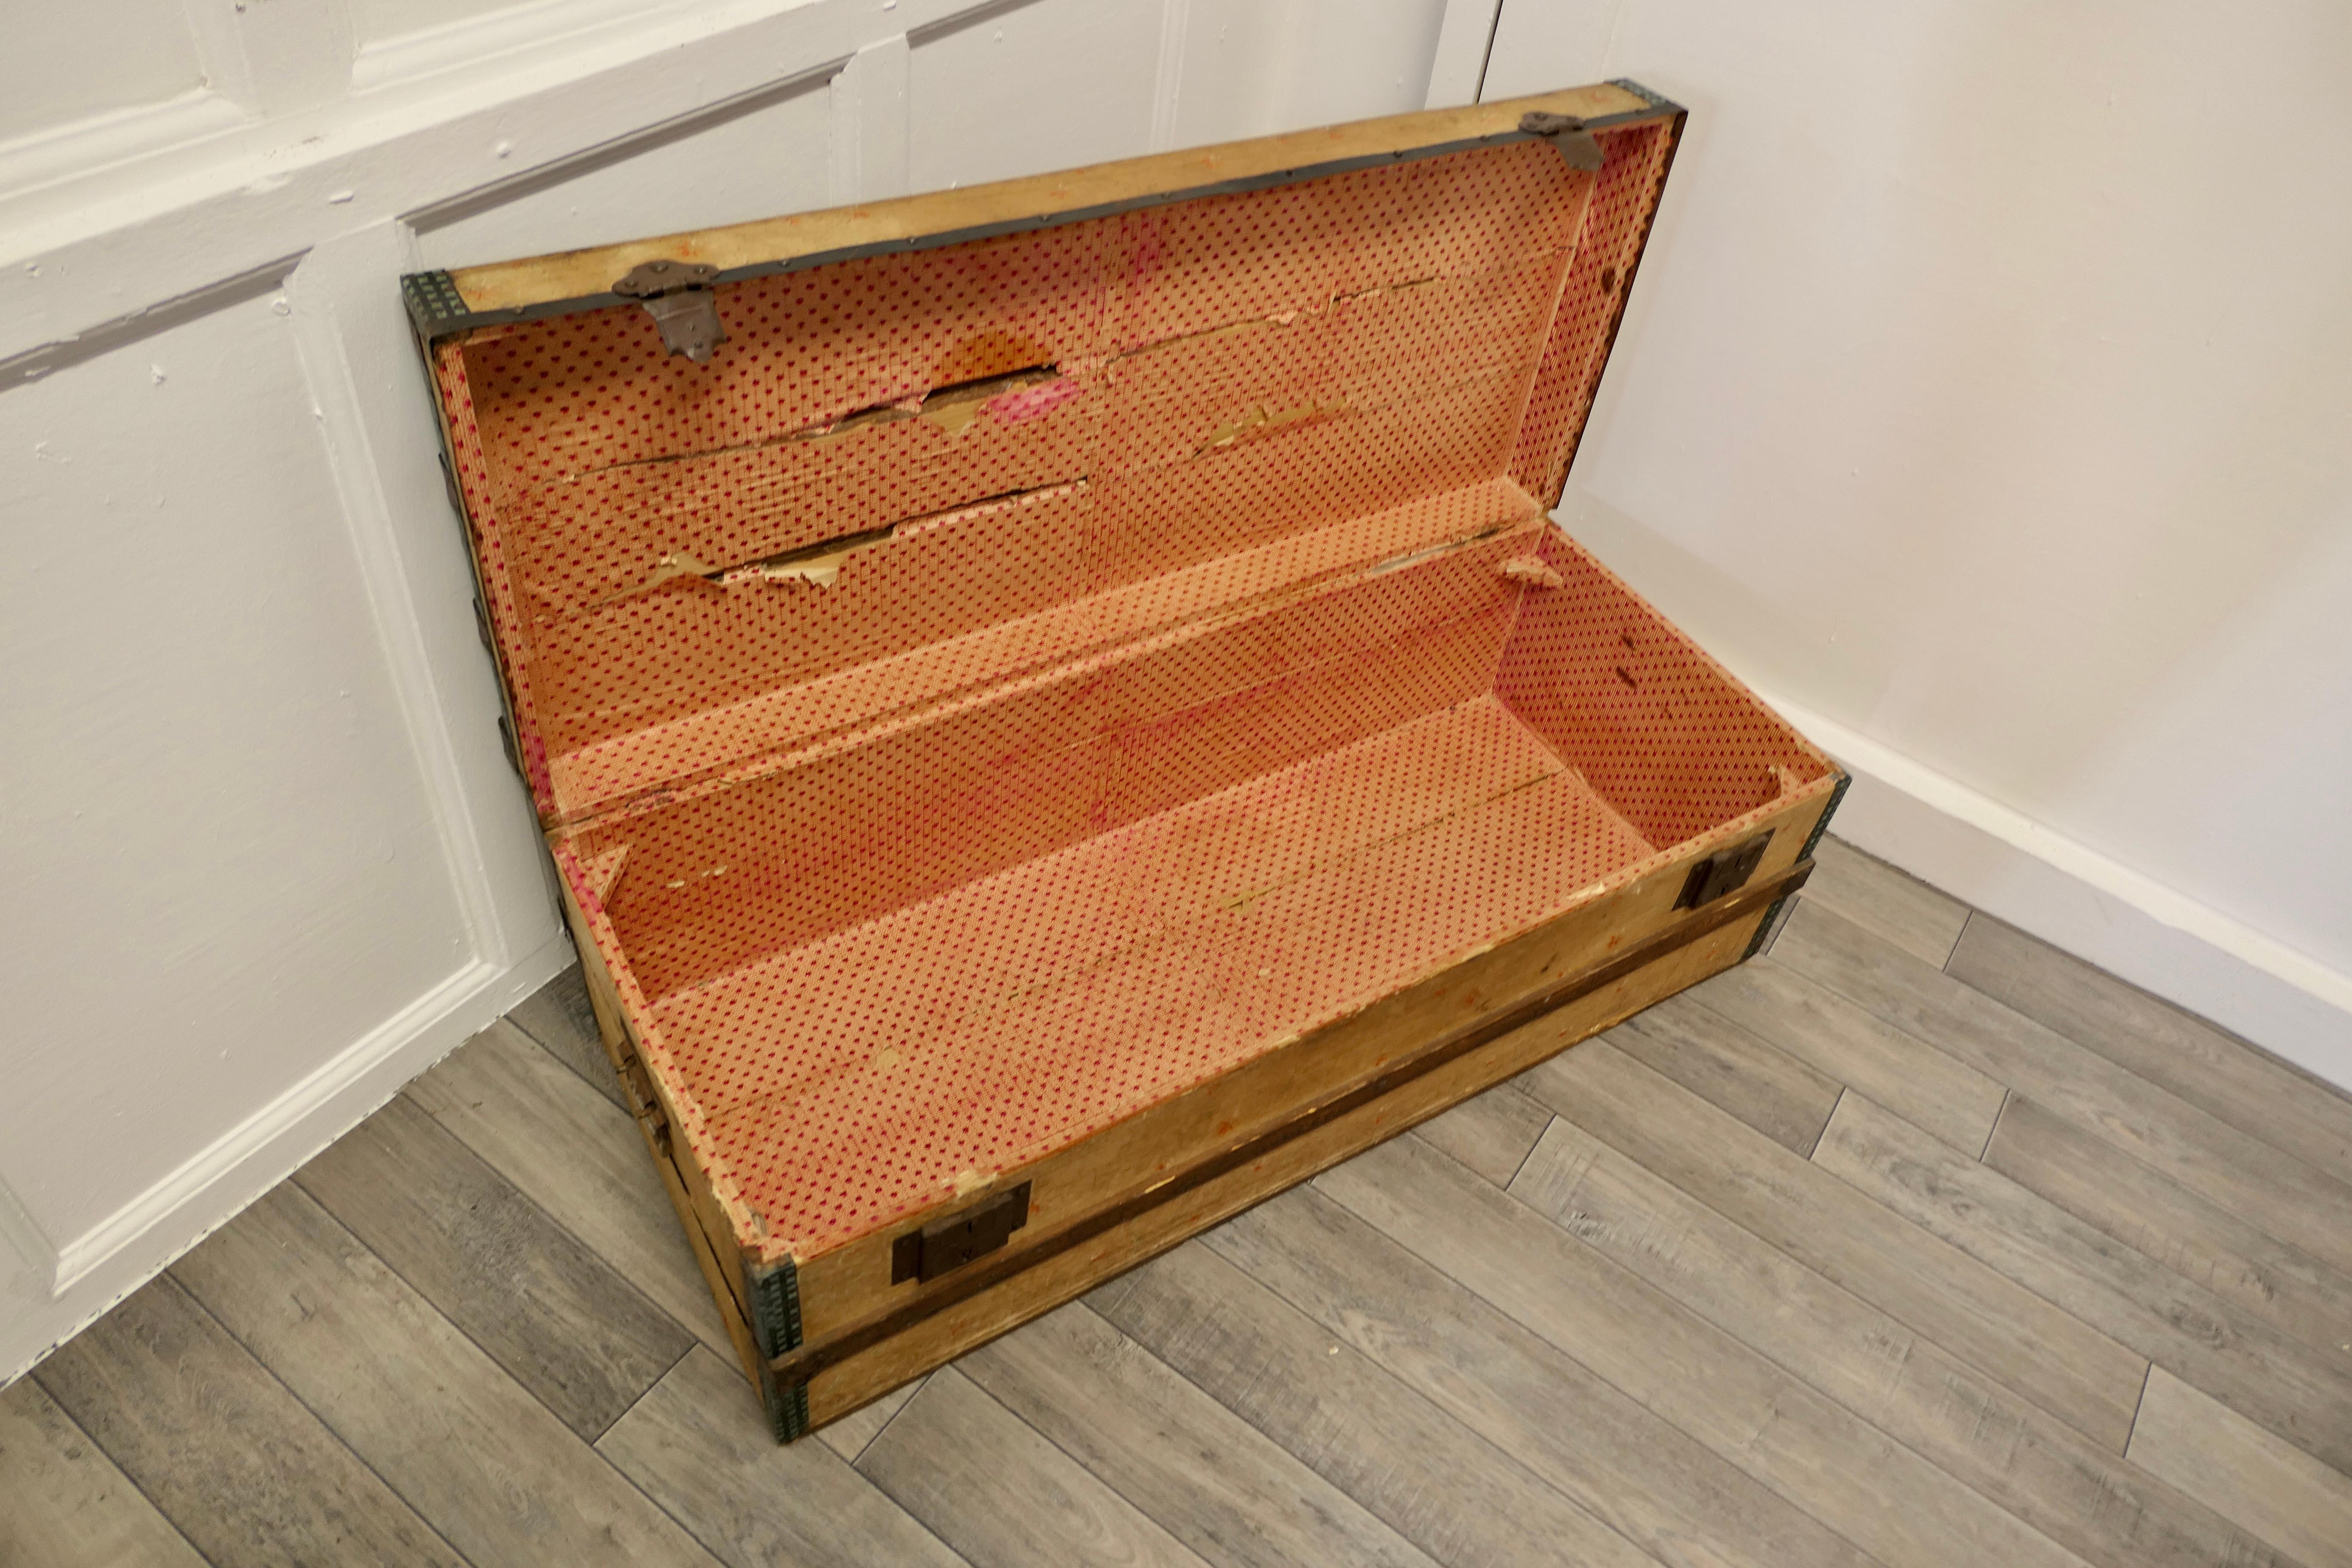 Spanish Folk Art Travel Chest or Steamer Trunk In Good Condition For Sale In Chillerton, Isle of Wight